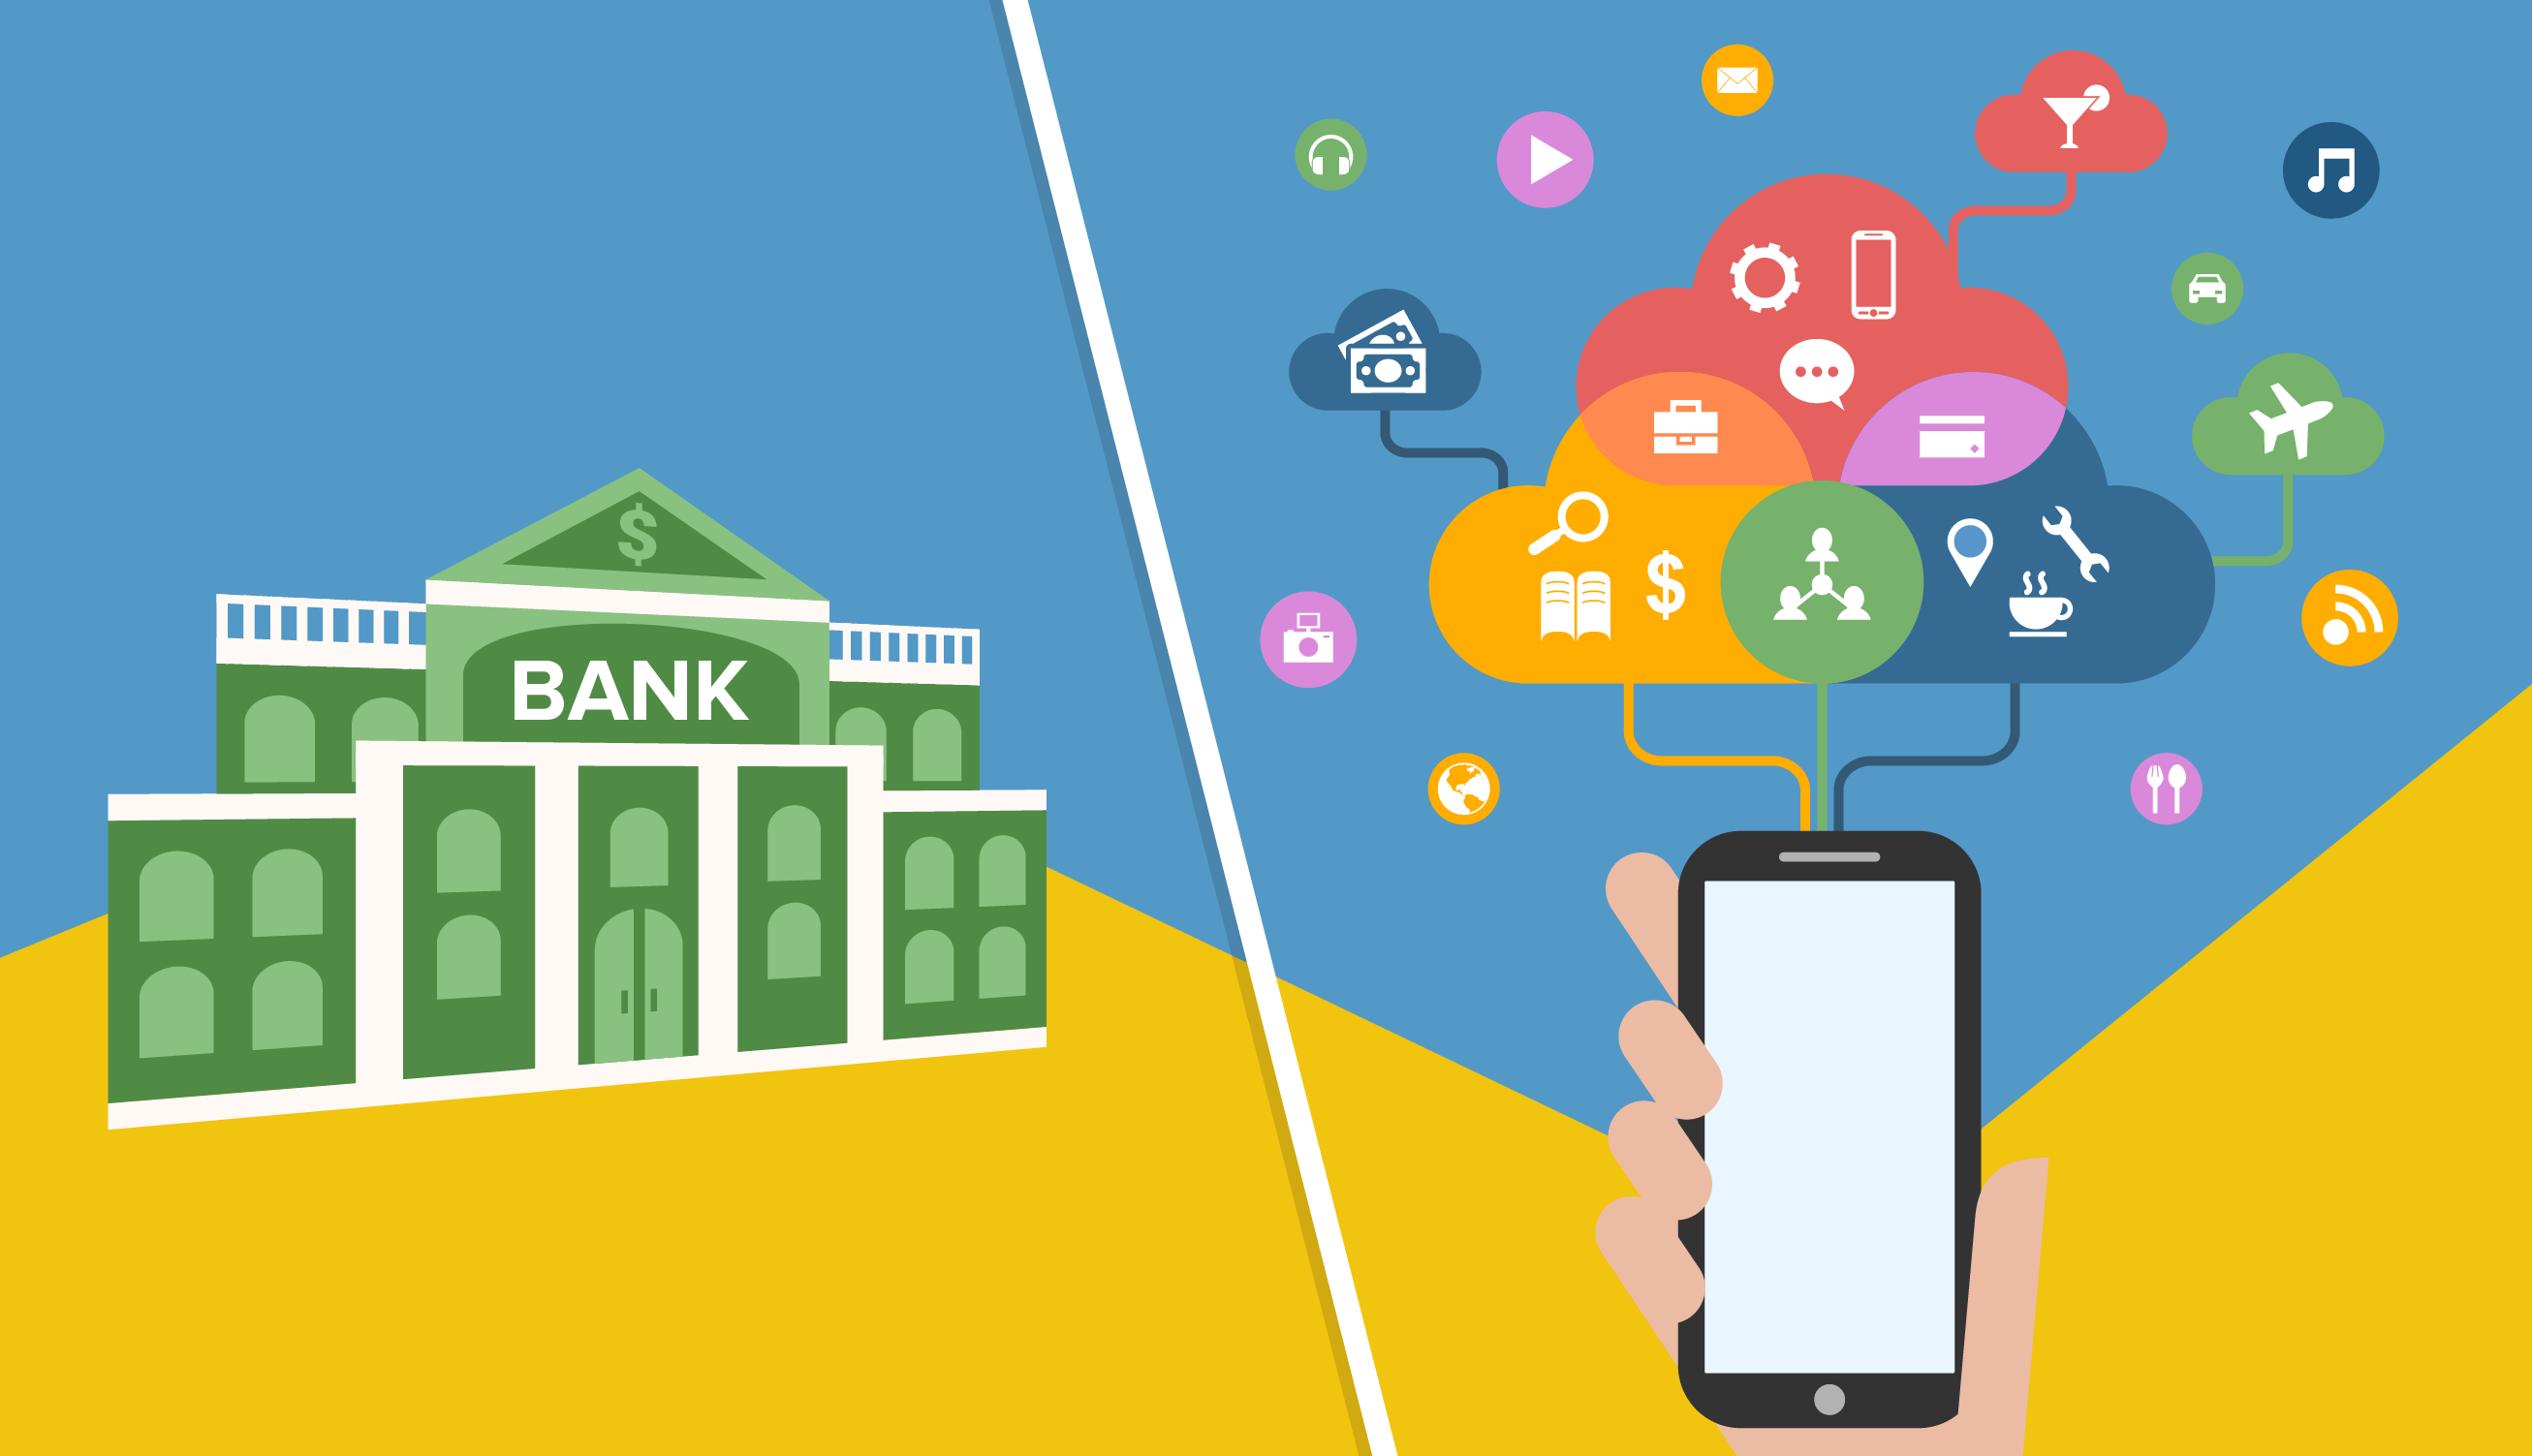 Banking-as-a-Service: Common play of banks and fintech